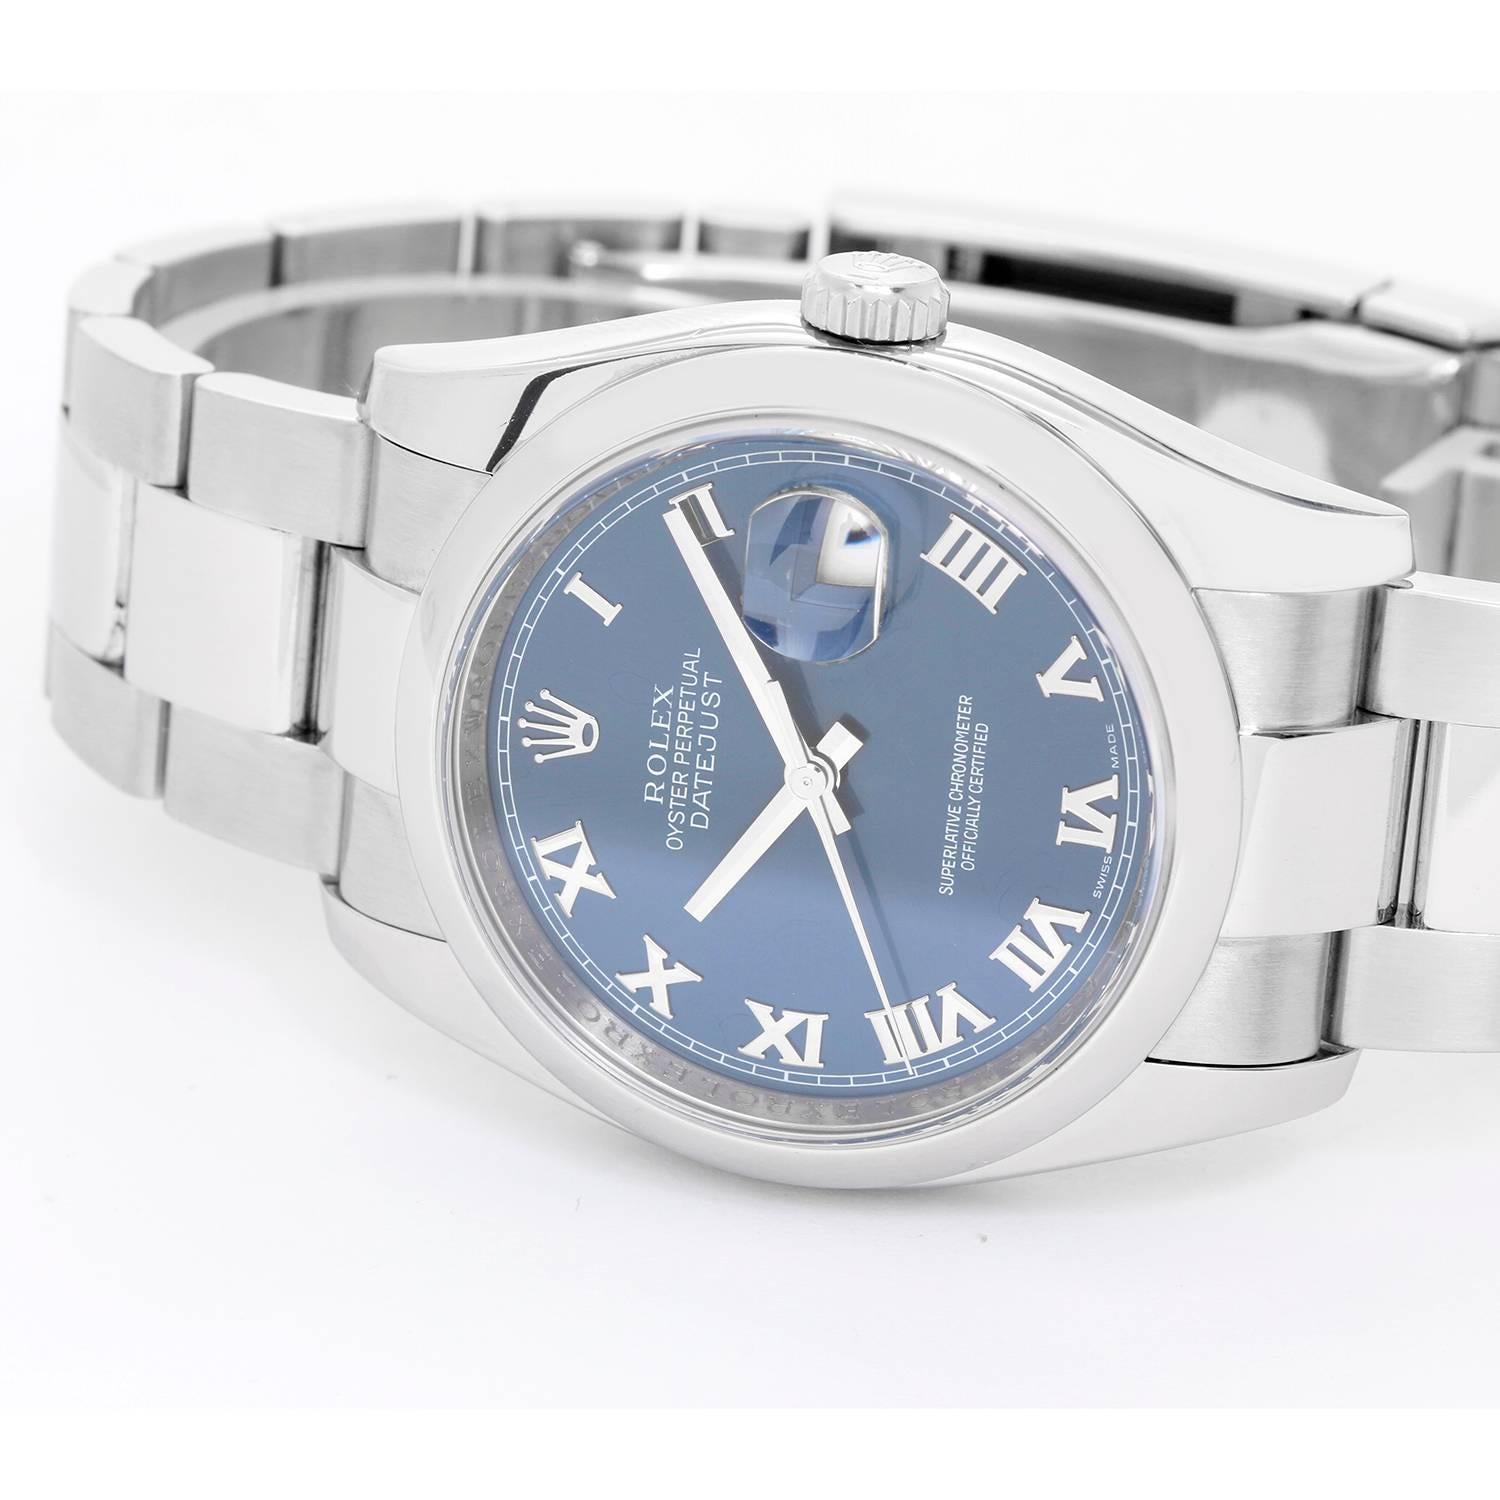 Rolex Datejust Men's Stainless Steel Automatic Winding Watch 116200 -  Automatic winding, 31 jewels, Quickset, sapphire crystal. Stainless steel case with smooth bezel (36mm diameter). Blue dial with Roman numerals. Stainless steel Oyster bracelet.